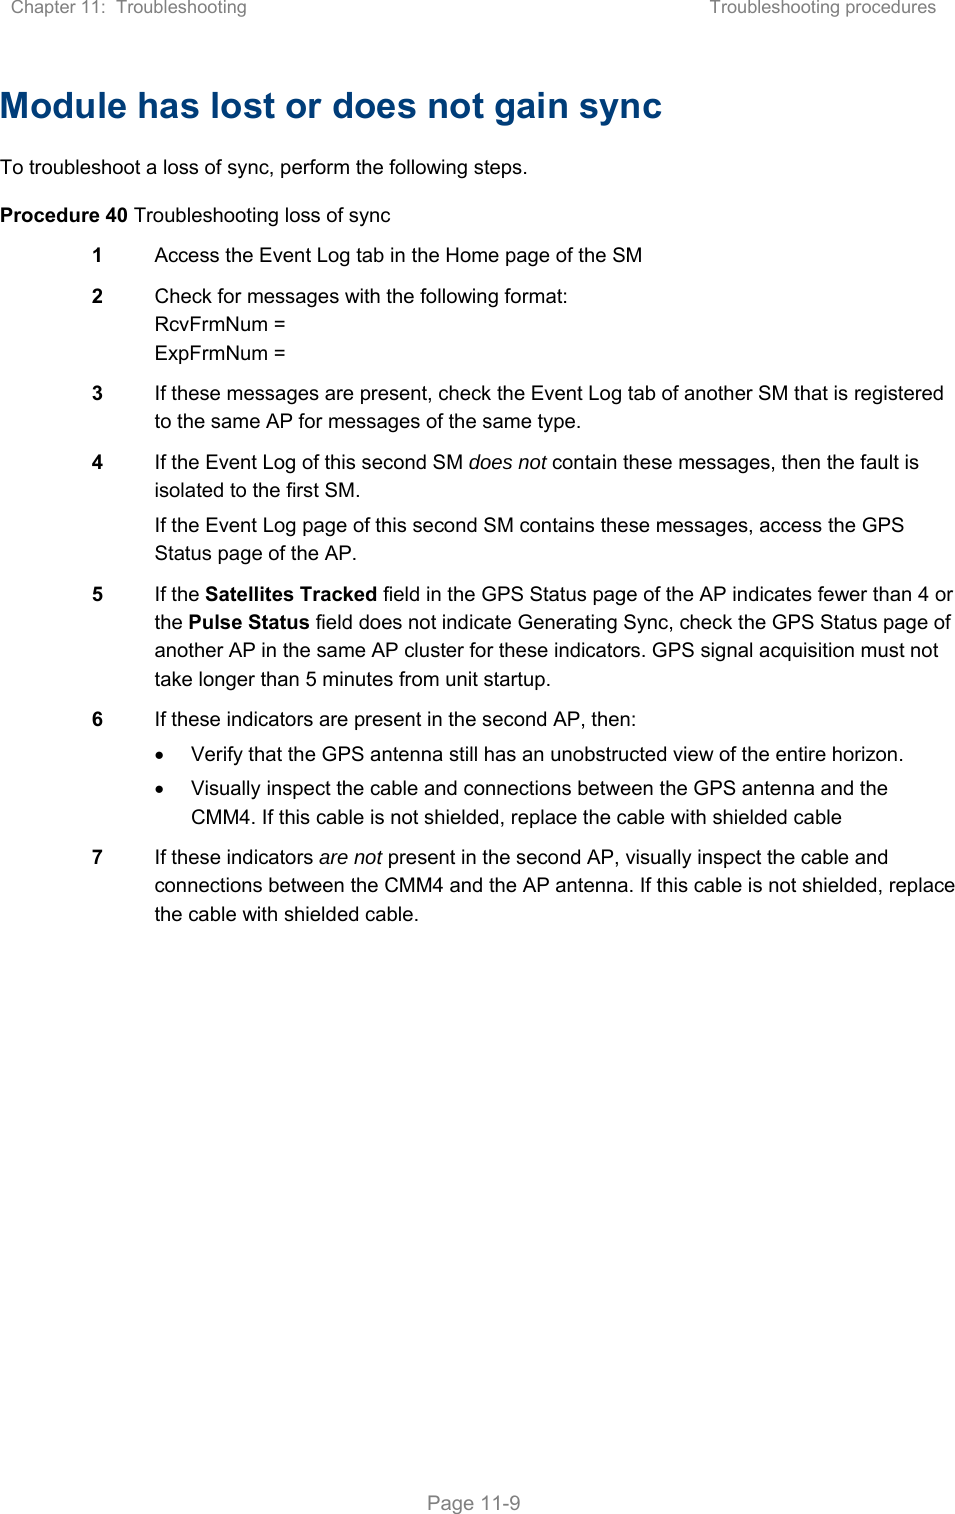 Chapter 11:  Troubleshooting  Troubleshooting procedures   Page 11-9 Module has lost or does not gain sync To troubleshoot a loss of sync, perform the following steps. Procedure 40 Troubleshooting loss of sync 1  Access the Event Log tab in the Home page of the SM 2  Check for messages with the following format: RcvFrmNum = ExpFrmNum = 3  If these messages are present, check the Event Log tab of another SM that is registered to the same AP for messages of the same type. 4  If the Event Log of this second SM does not contain these messages, then the fault is isolated to the first SM. If the Event Log page of this second SM contains these messages, access the GPS Status page of the AP. 5  If the Satellites Tracked field in the GPS Status page of the AP indicates fewer than 4 or the Pulse Status field does not indicate Generating Sync, check the GPS Status page of another AP in the same AP cluster for these indicators. GPS signal acquisition must not take longer than 5 minutes from unit startup. 6  If these indicators are present in the second AP, then:   Verify that the GPS antenna still has an unobstructed view of the entire horizon.   Visually inspect the cable and connections between the GPS antenna and the CMM4. If this cable is not shielded, replace the cable with shielded cable 7  If these indicators are not present in the second AP, visually inspect the cable and connections between the CMM4 and the AP antenna. If this cable is not shielded, replace the cable with shielded cable.  